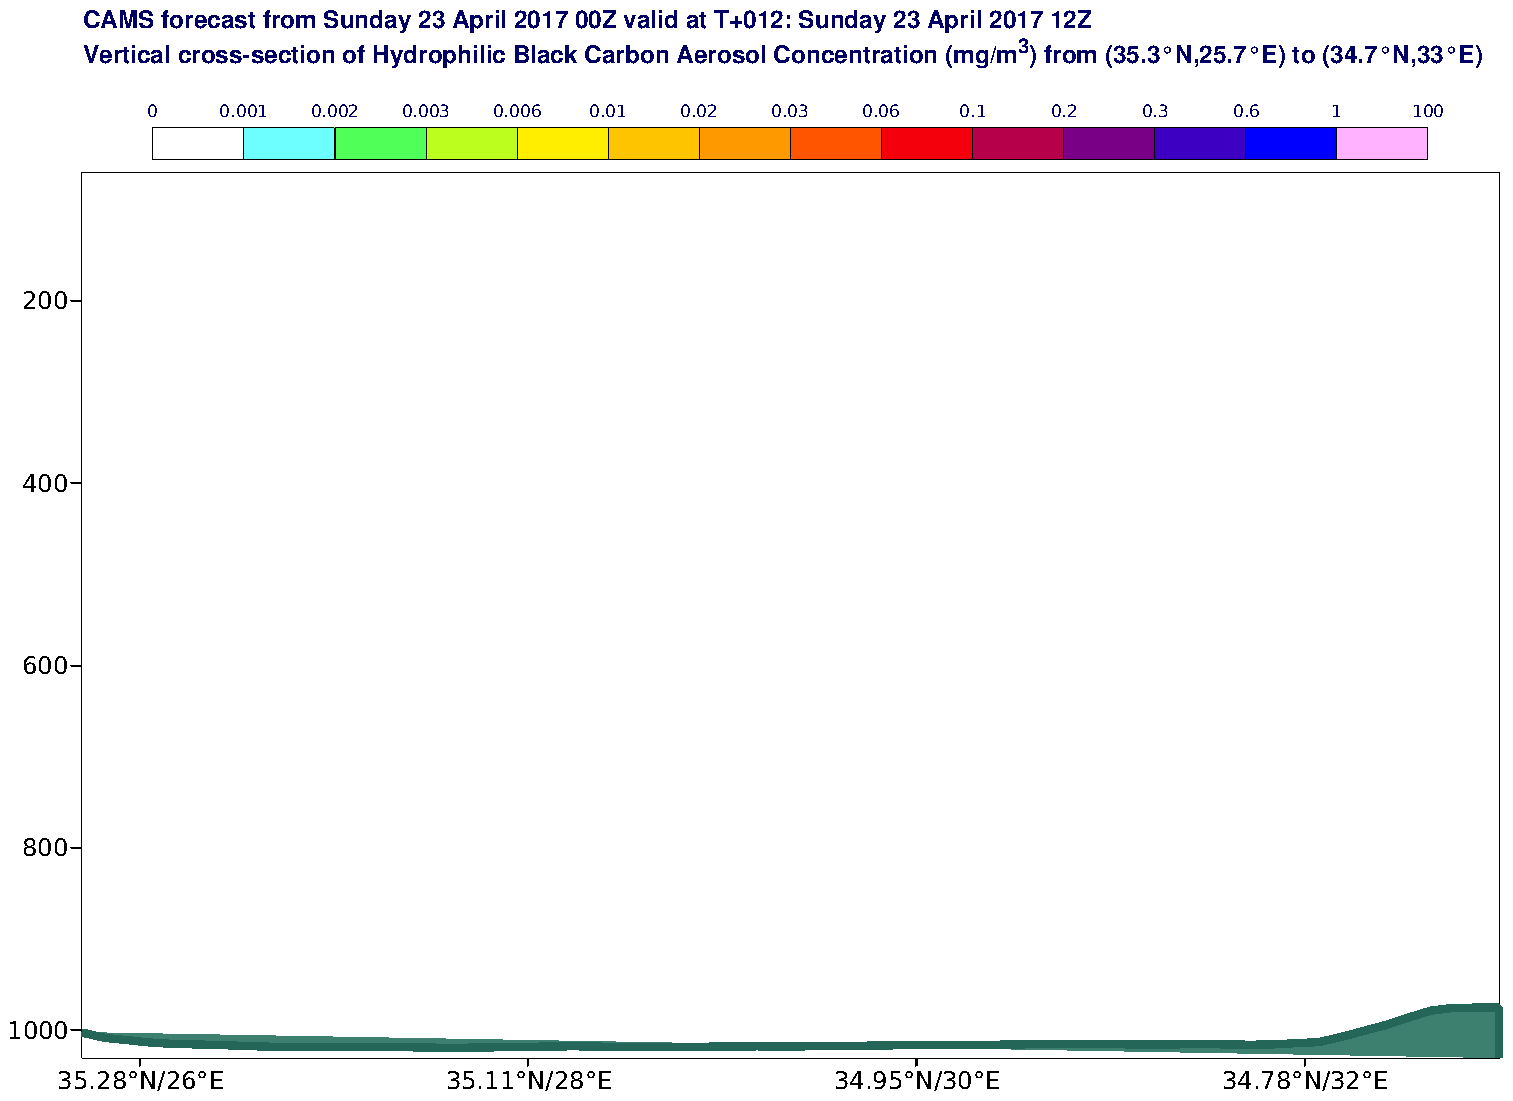 Vertical cross-section of Hydrophilic Black Carbon Aerosol Concentration (mg/m3) valid at T12 - 2017-04-23 12:00